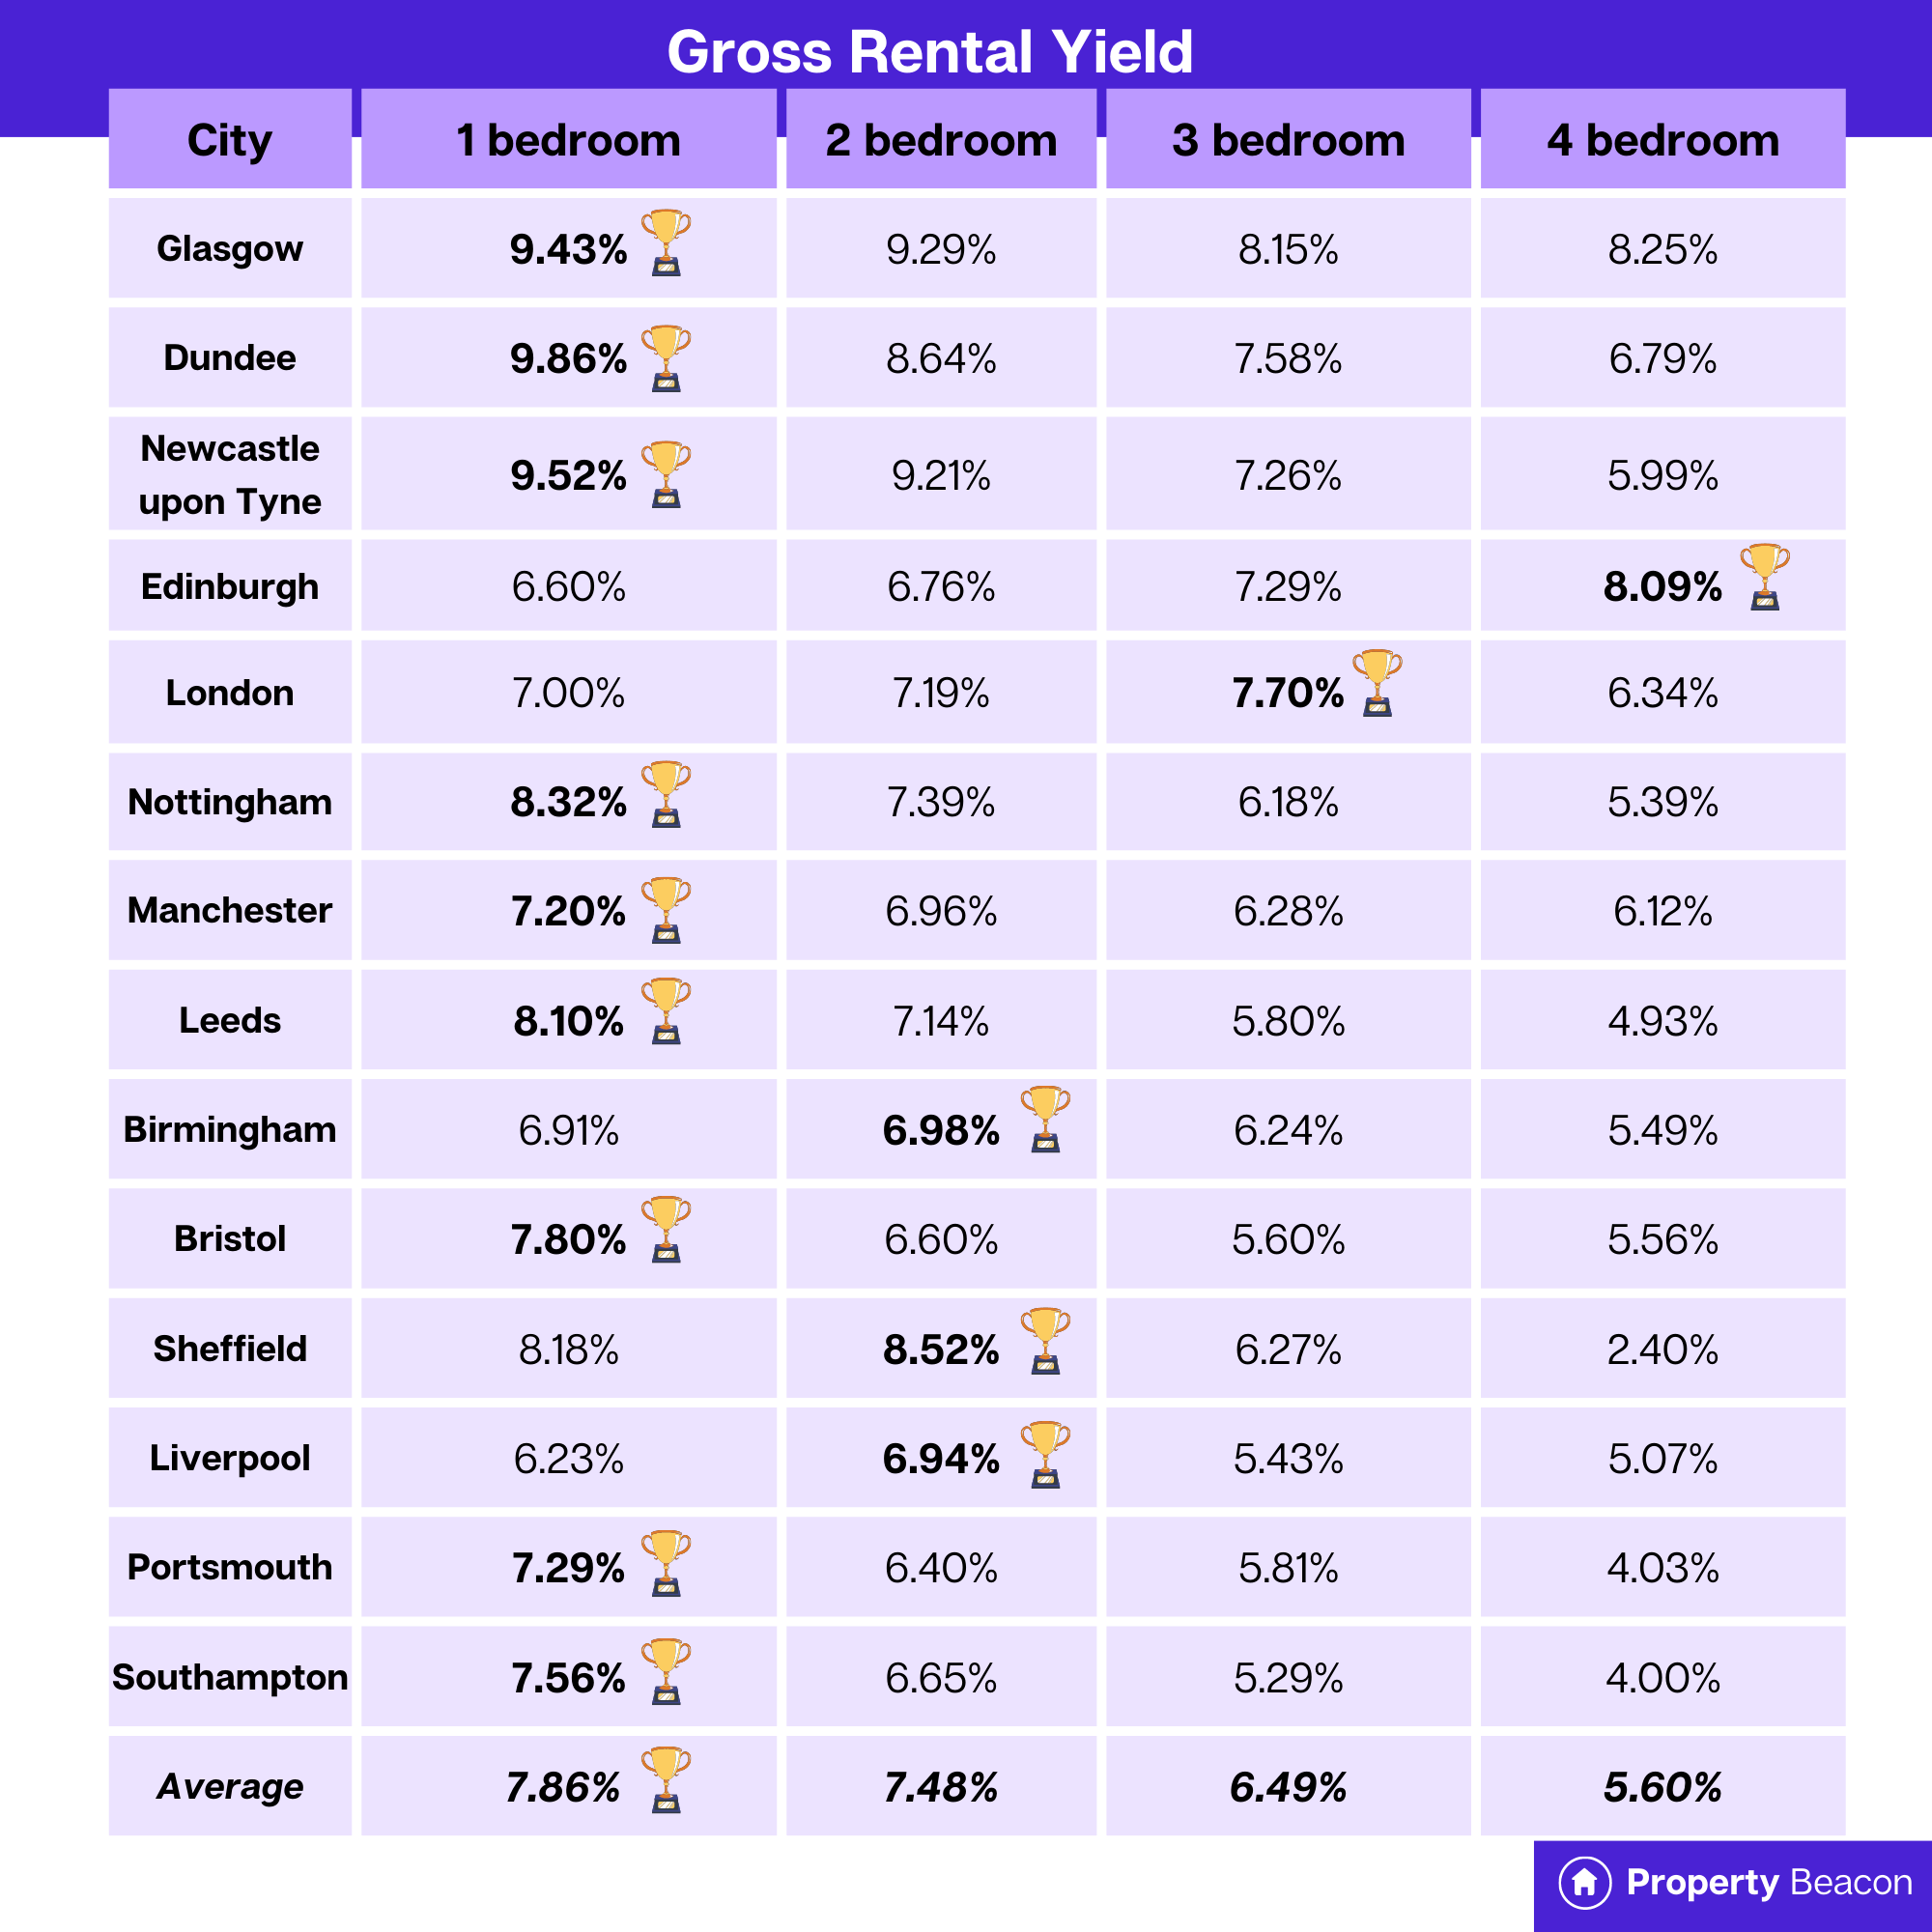 A graphic of a table showing gross rental yield for different UK cities sorted by number of bedrooms